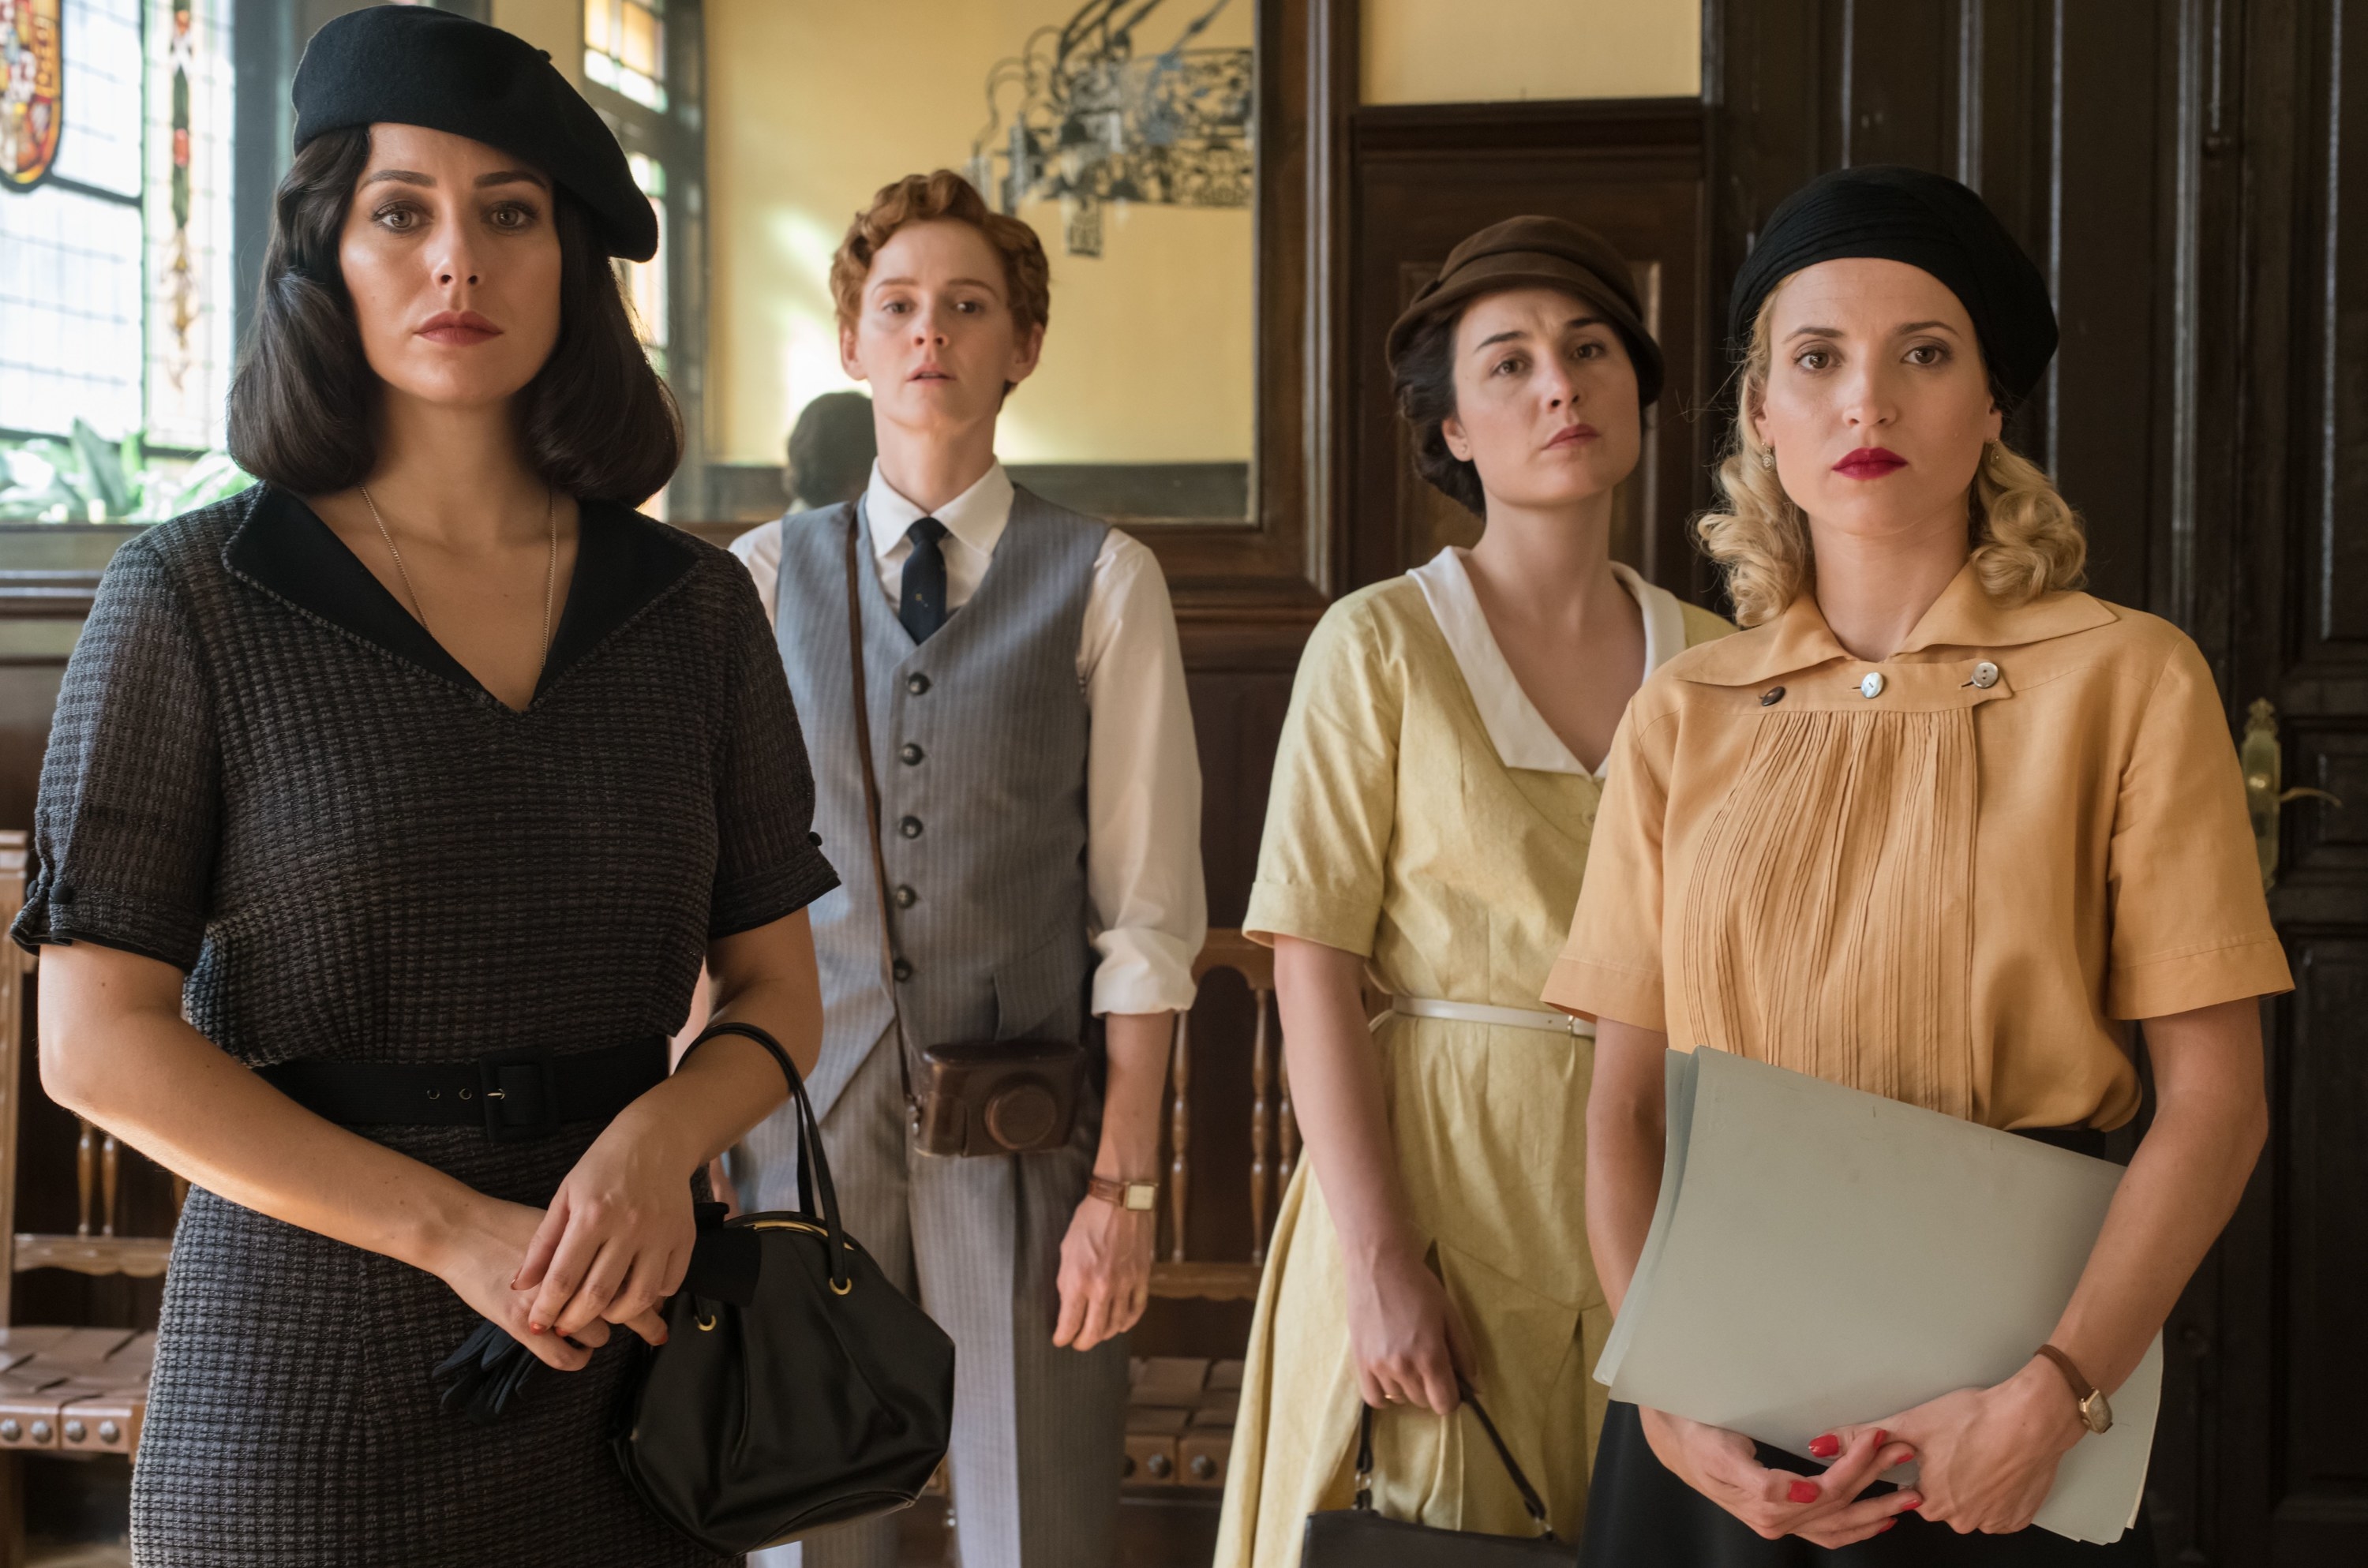 The final season of Cable Girls/Las Chicas del Cable will continue to explo...